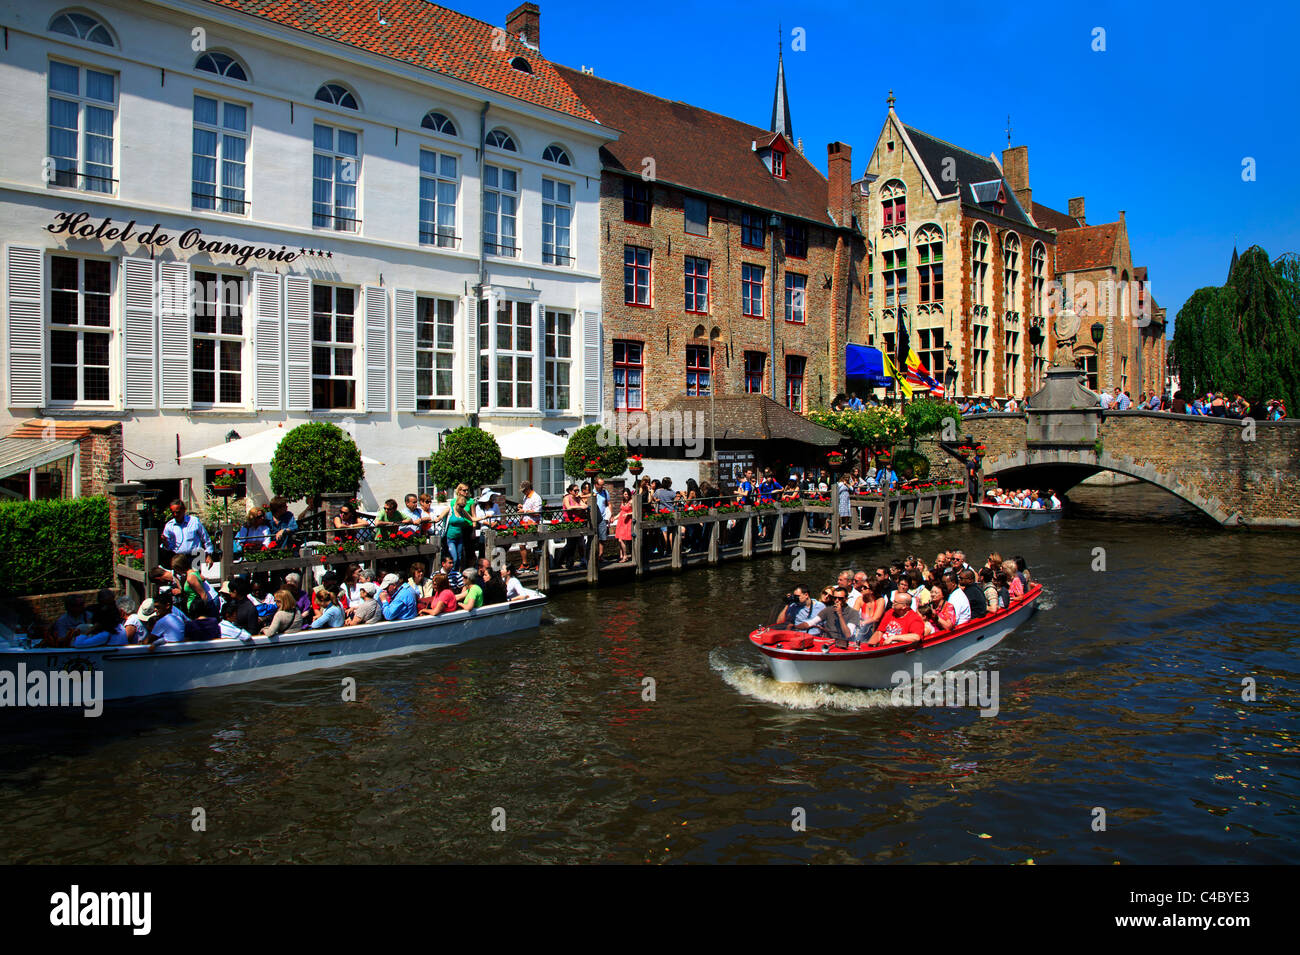 A canal scene in Bruges Belgium Stock Photo